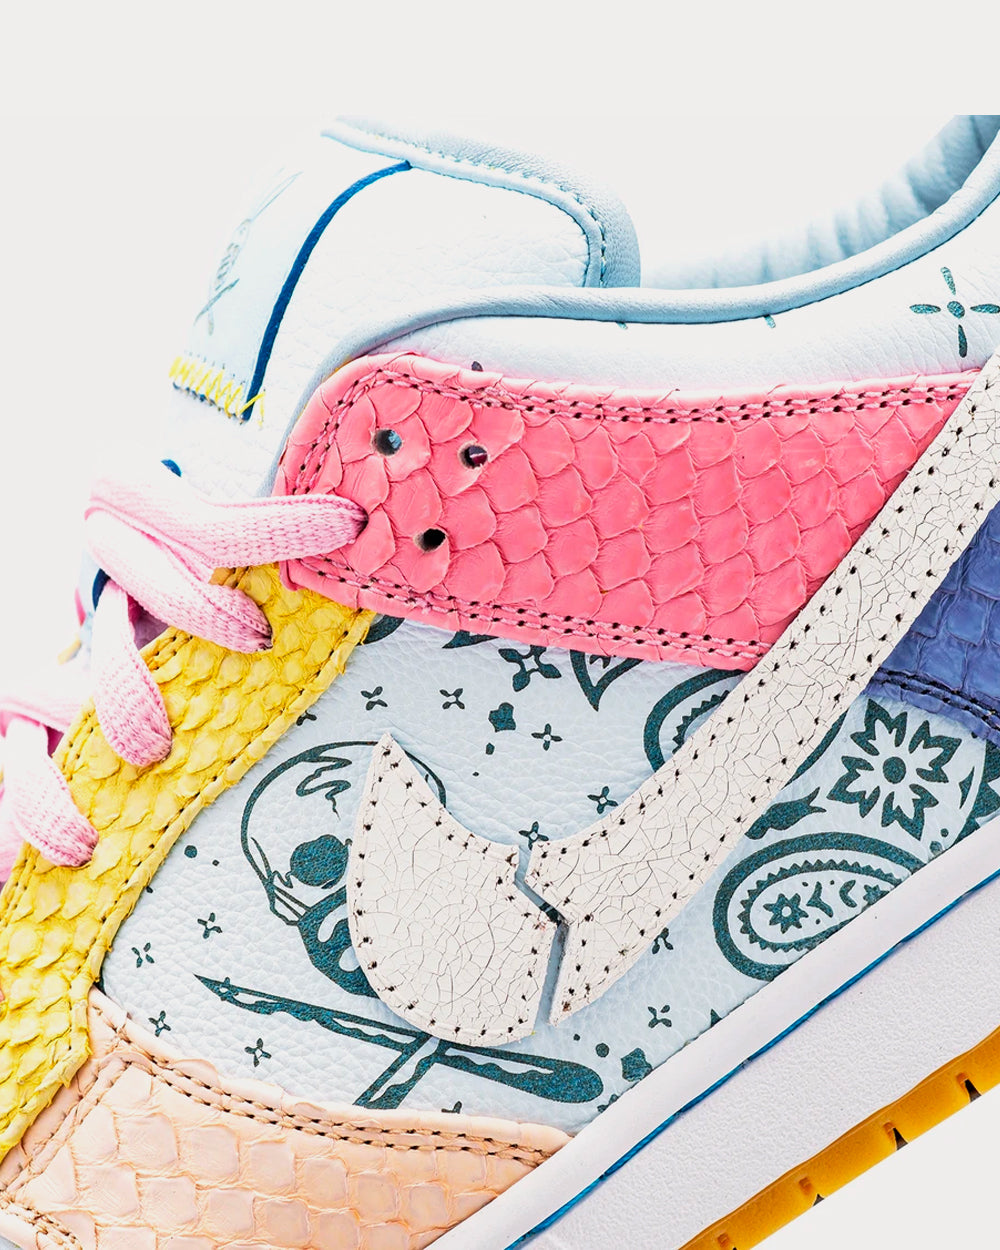 The Shoe Surgeon - Easter Paisley SB Dunk Low Top Sneakers